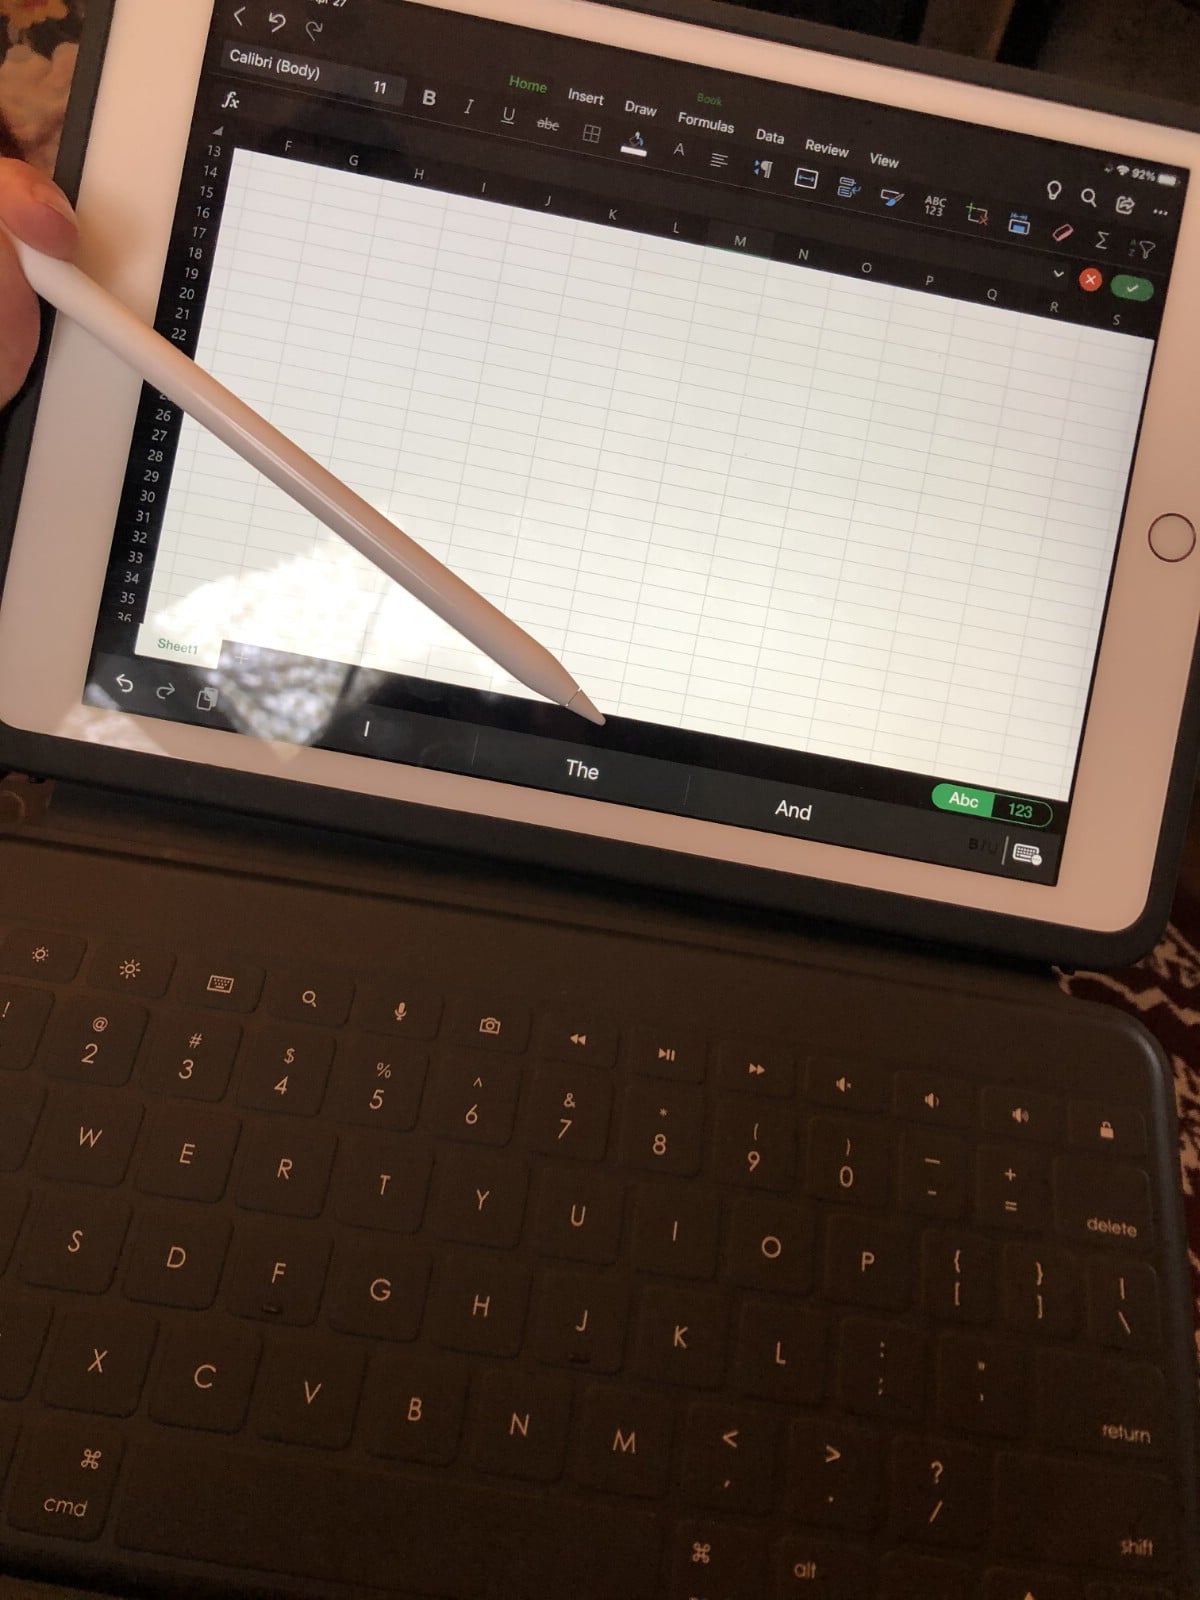 iPad being used to plan a garden layout